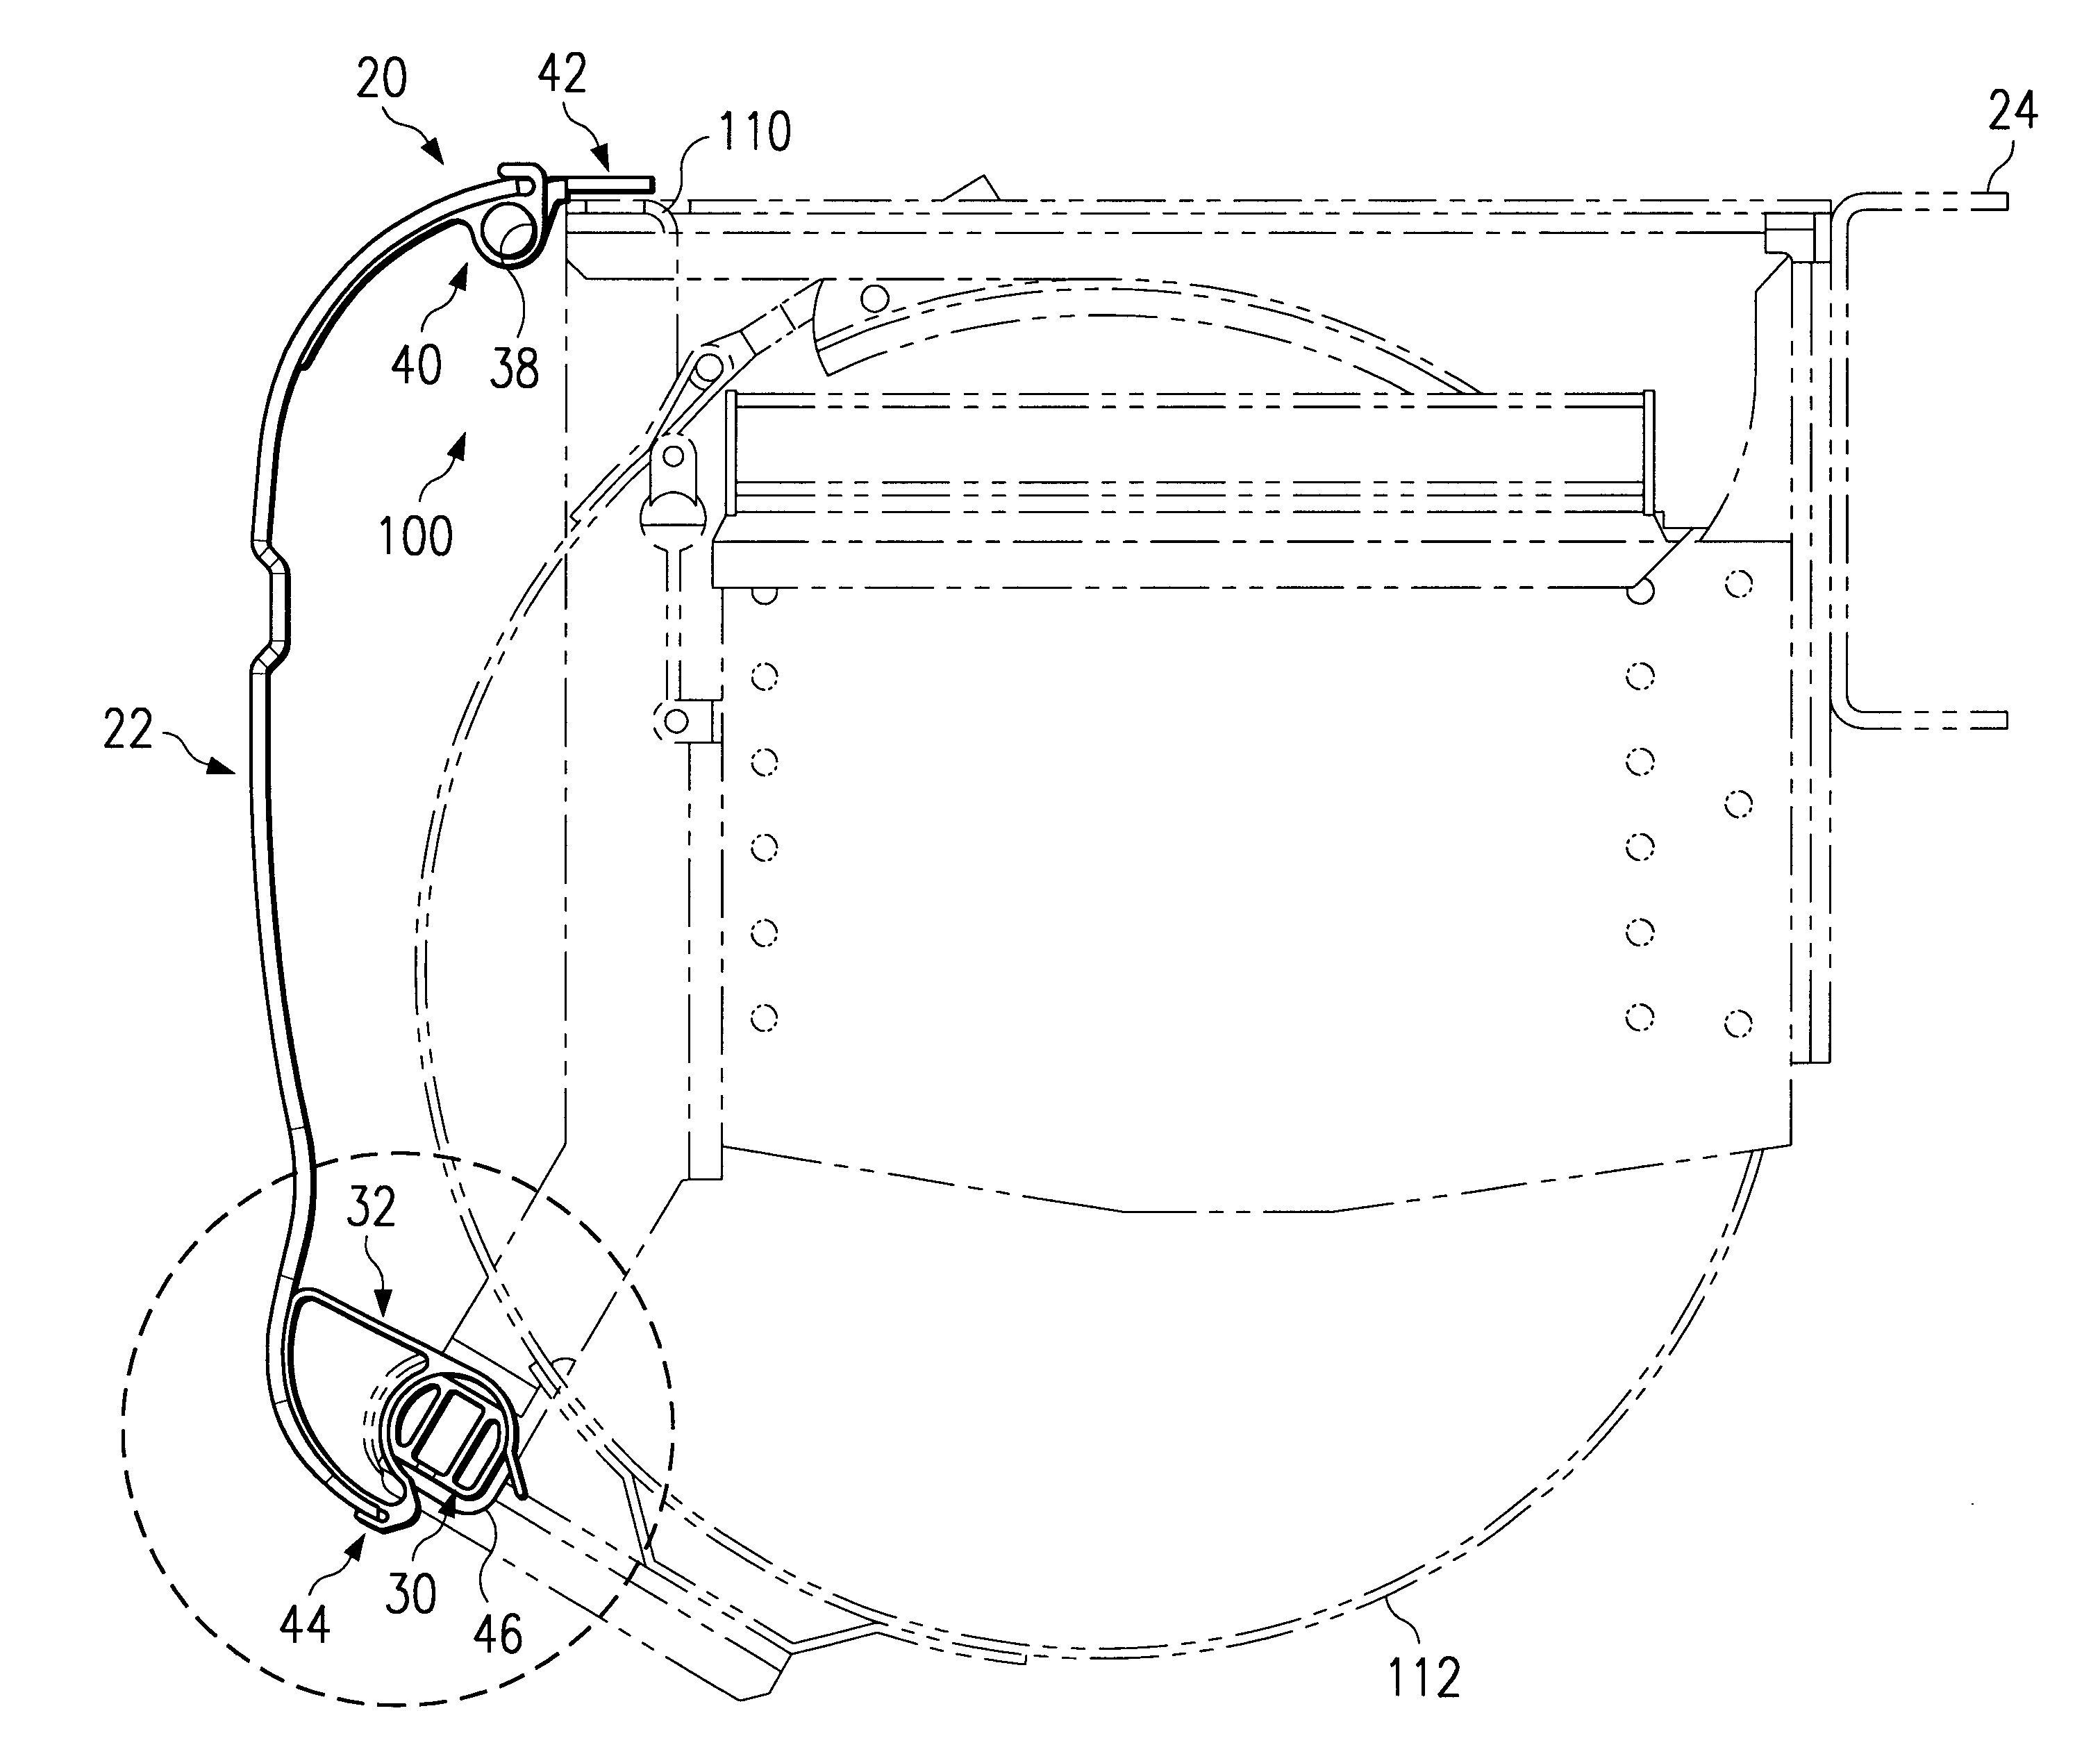 Vehicle body panel mounting system